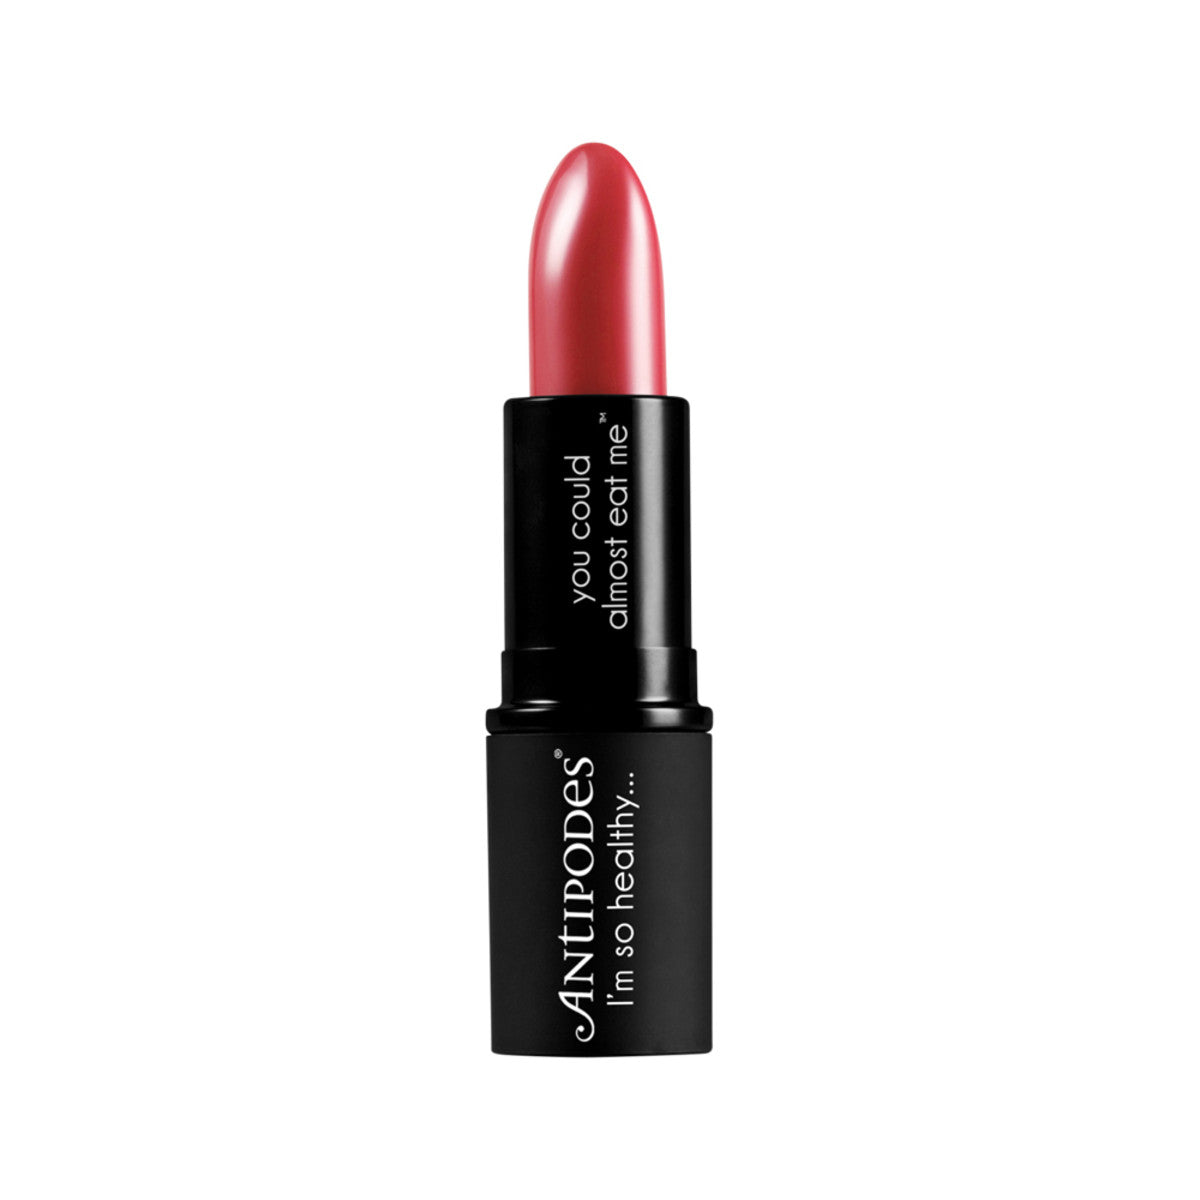 Antipodes - Lipstick Remarkably Red